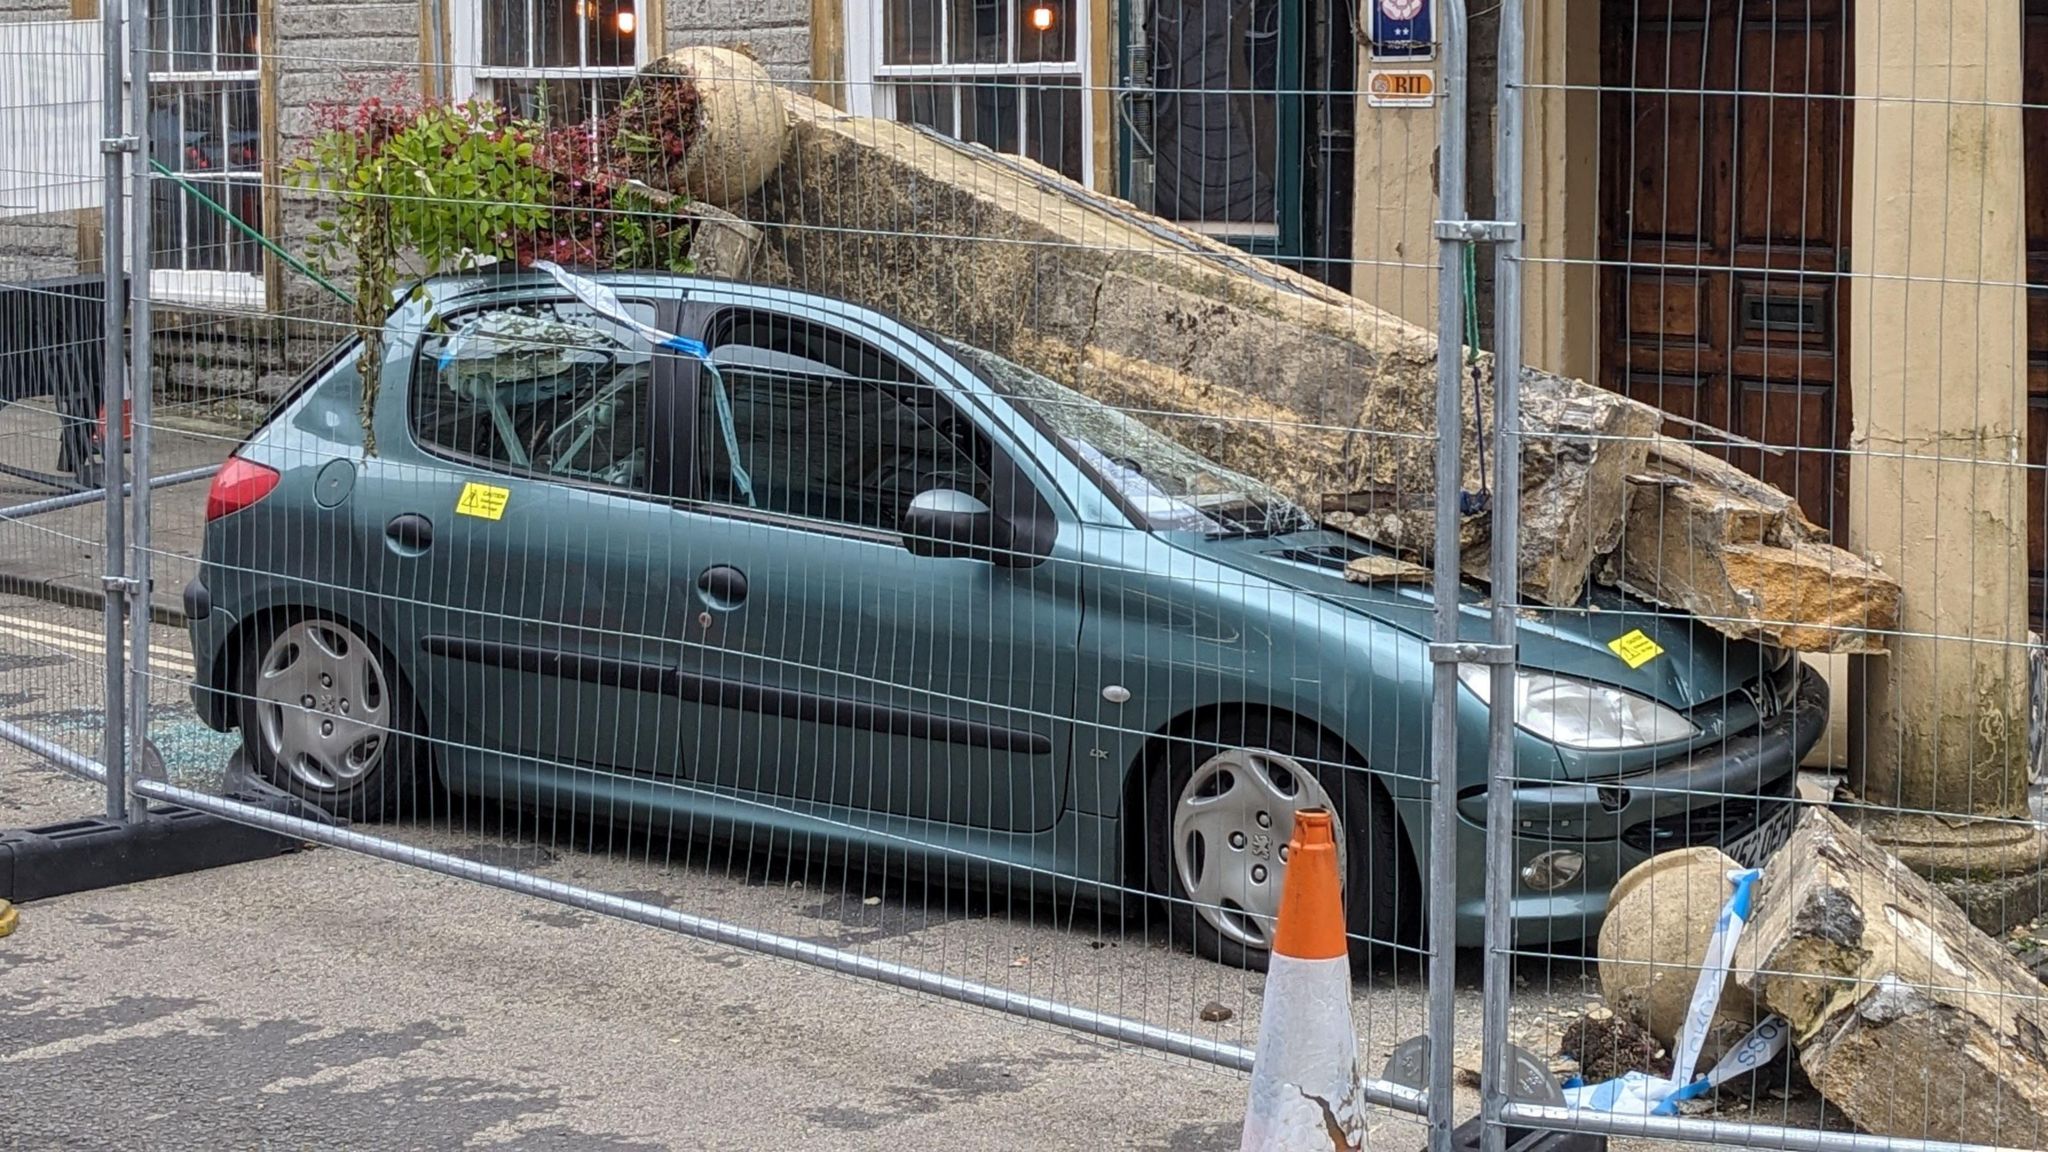 The car with pillar on its roof at Cheapside in Somerset